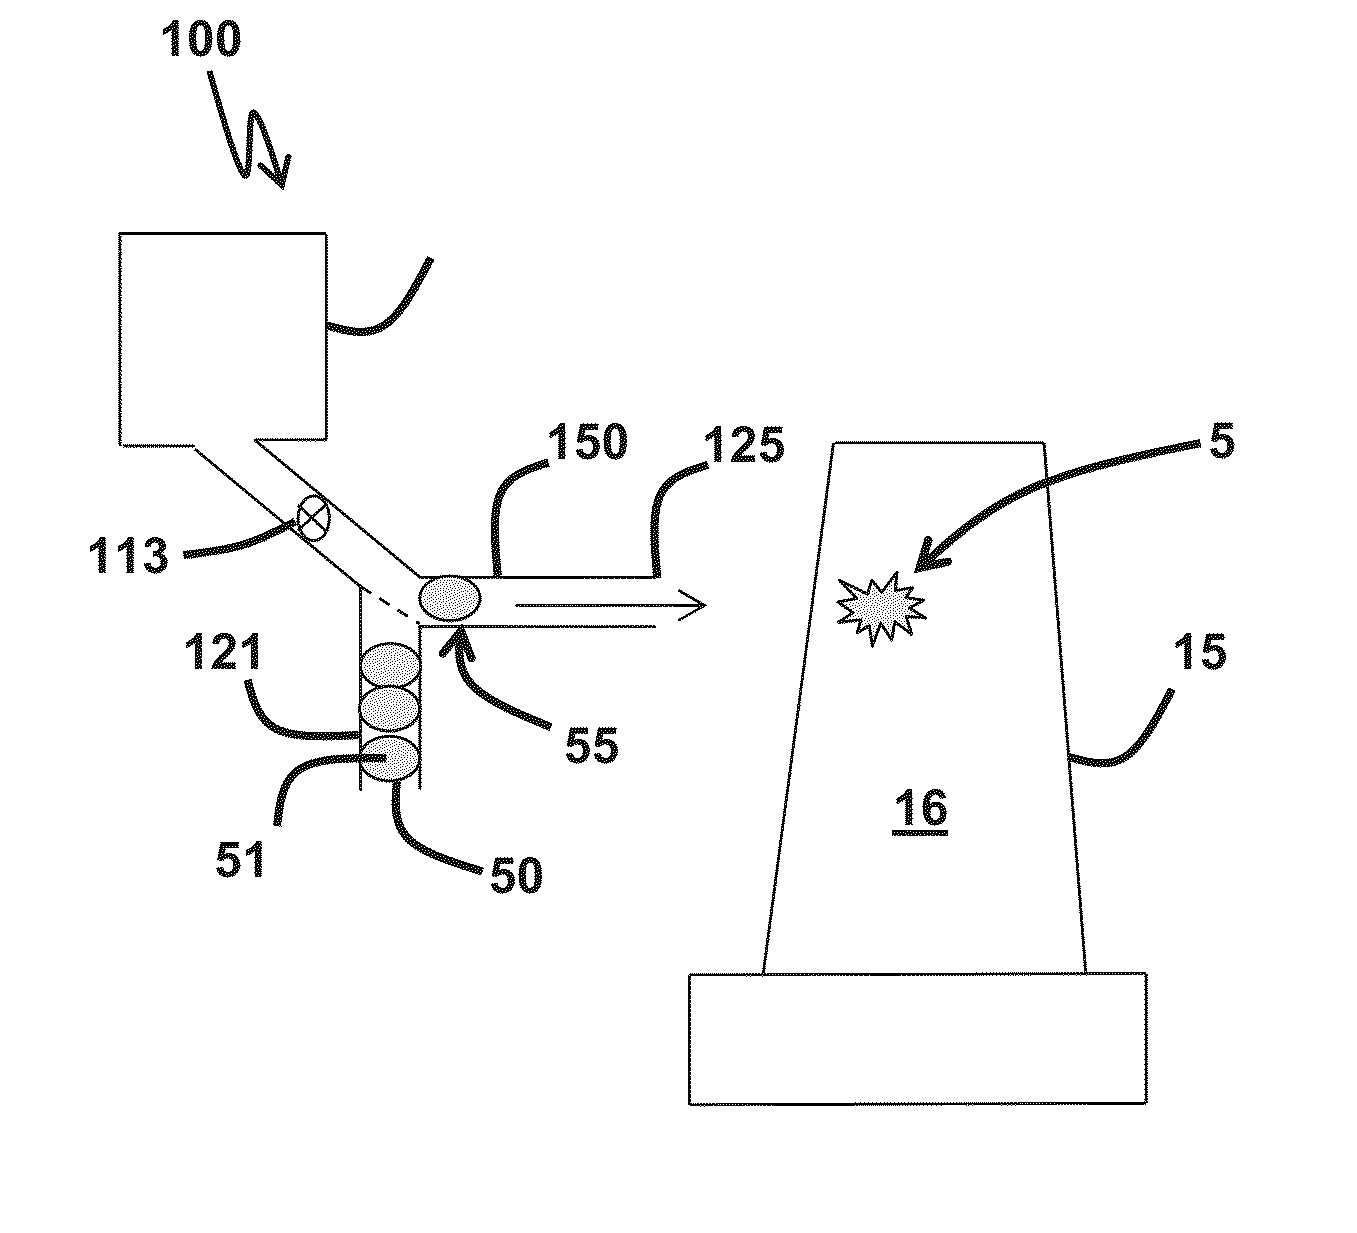 Turbine component patch delivery system